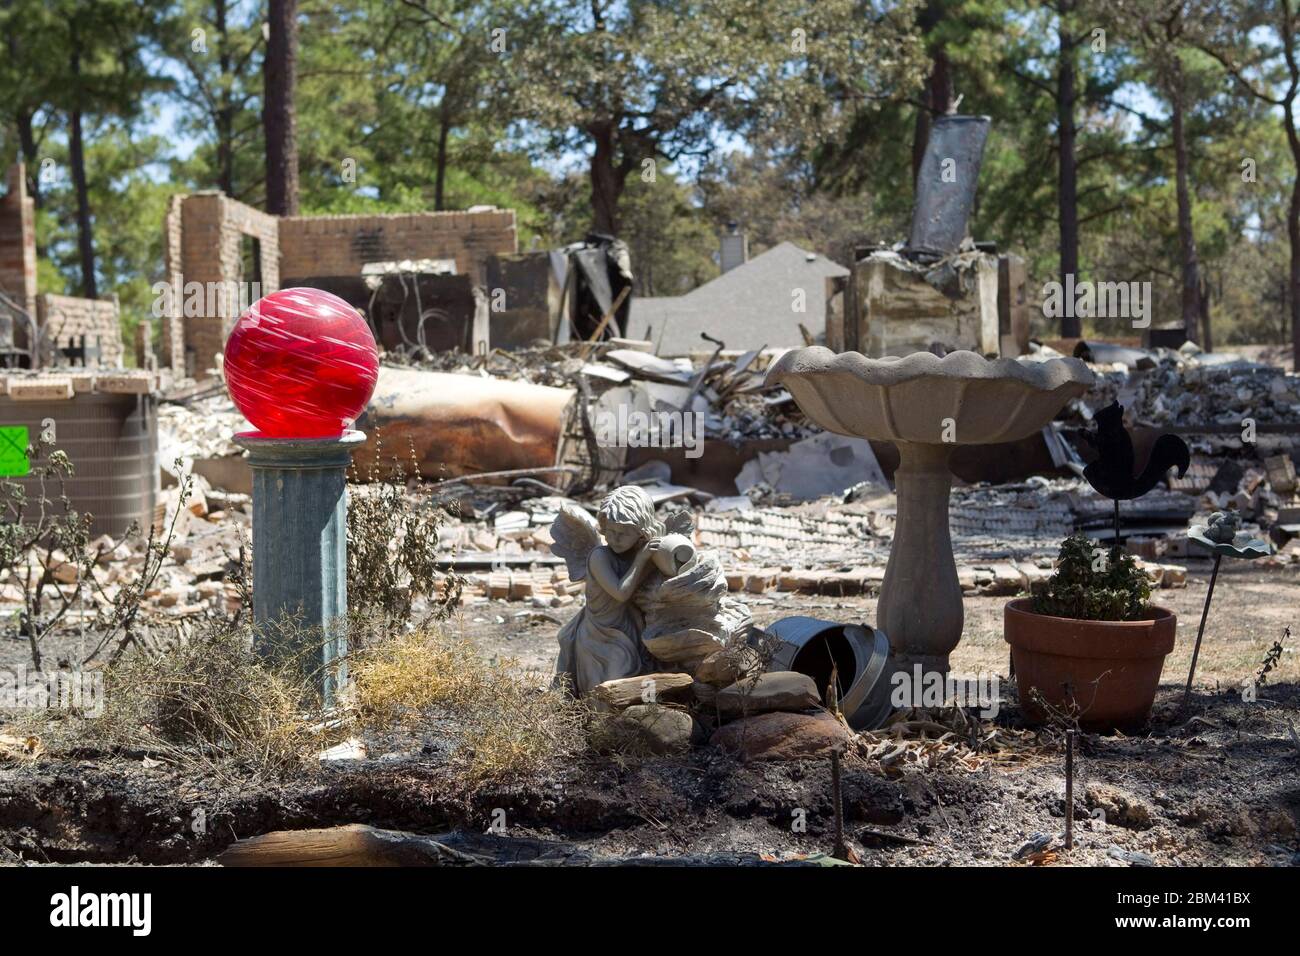 Bastrop County Texas USA, September 9, 2011: The aftermath of wildfire through the piney woods in Bastrop County is shown in this destroyed home, where stone, brick and concrete pieces remained intact while wooden structures burned. The fires destroyed more than 1,400 houses and scorched more than 38,000 acres while it was out of control for five days. ©Bob Daemmrich Stock Photo